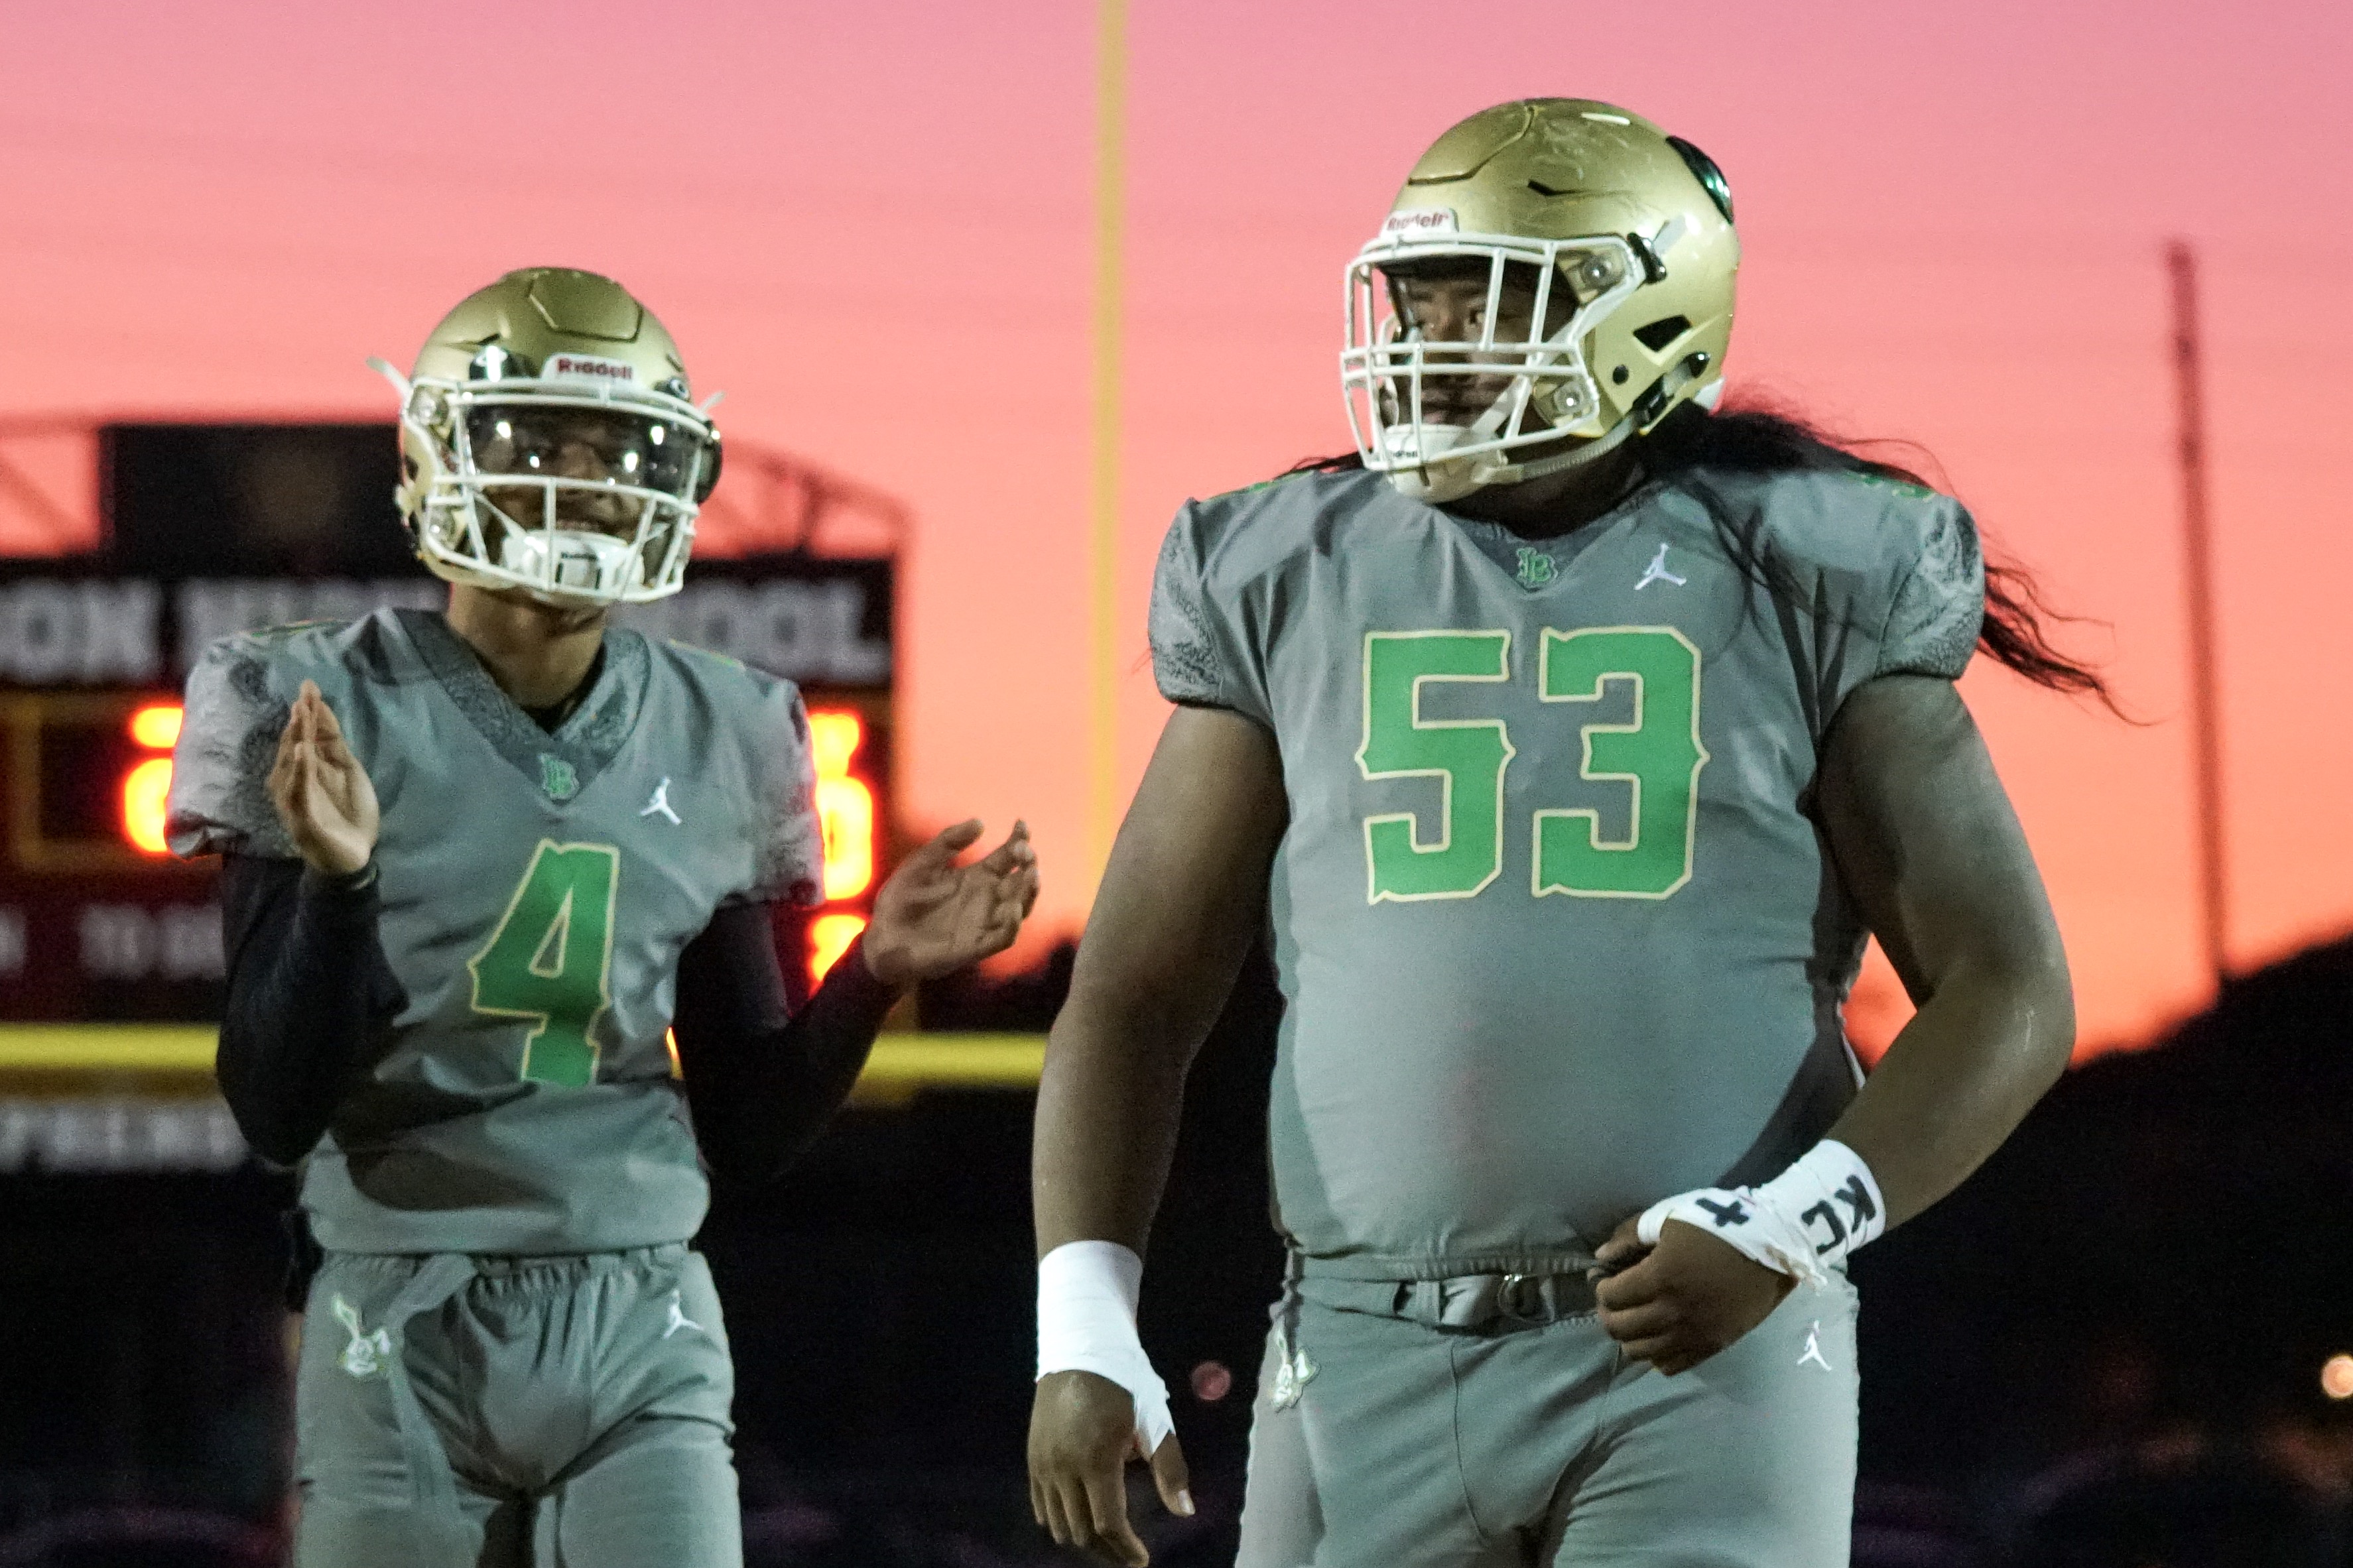 Long Beach Poly Unveils Jordan Brand Gear For Wilson Game – The562.org